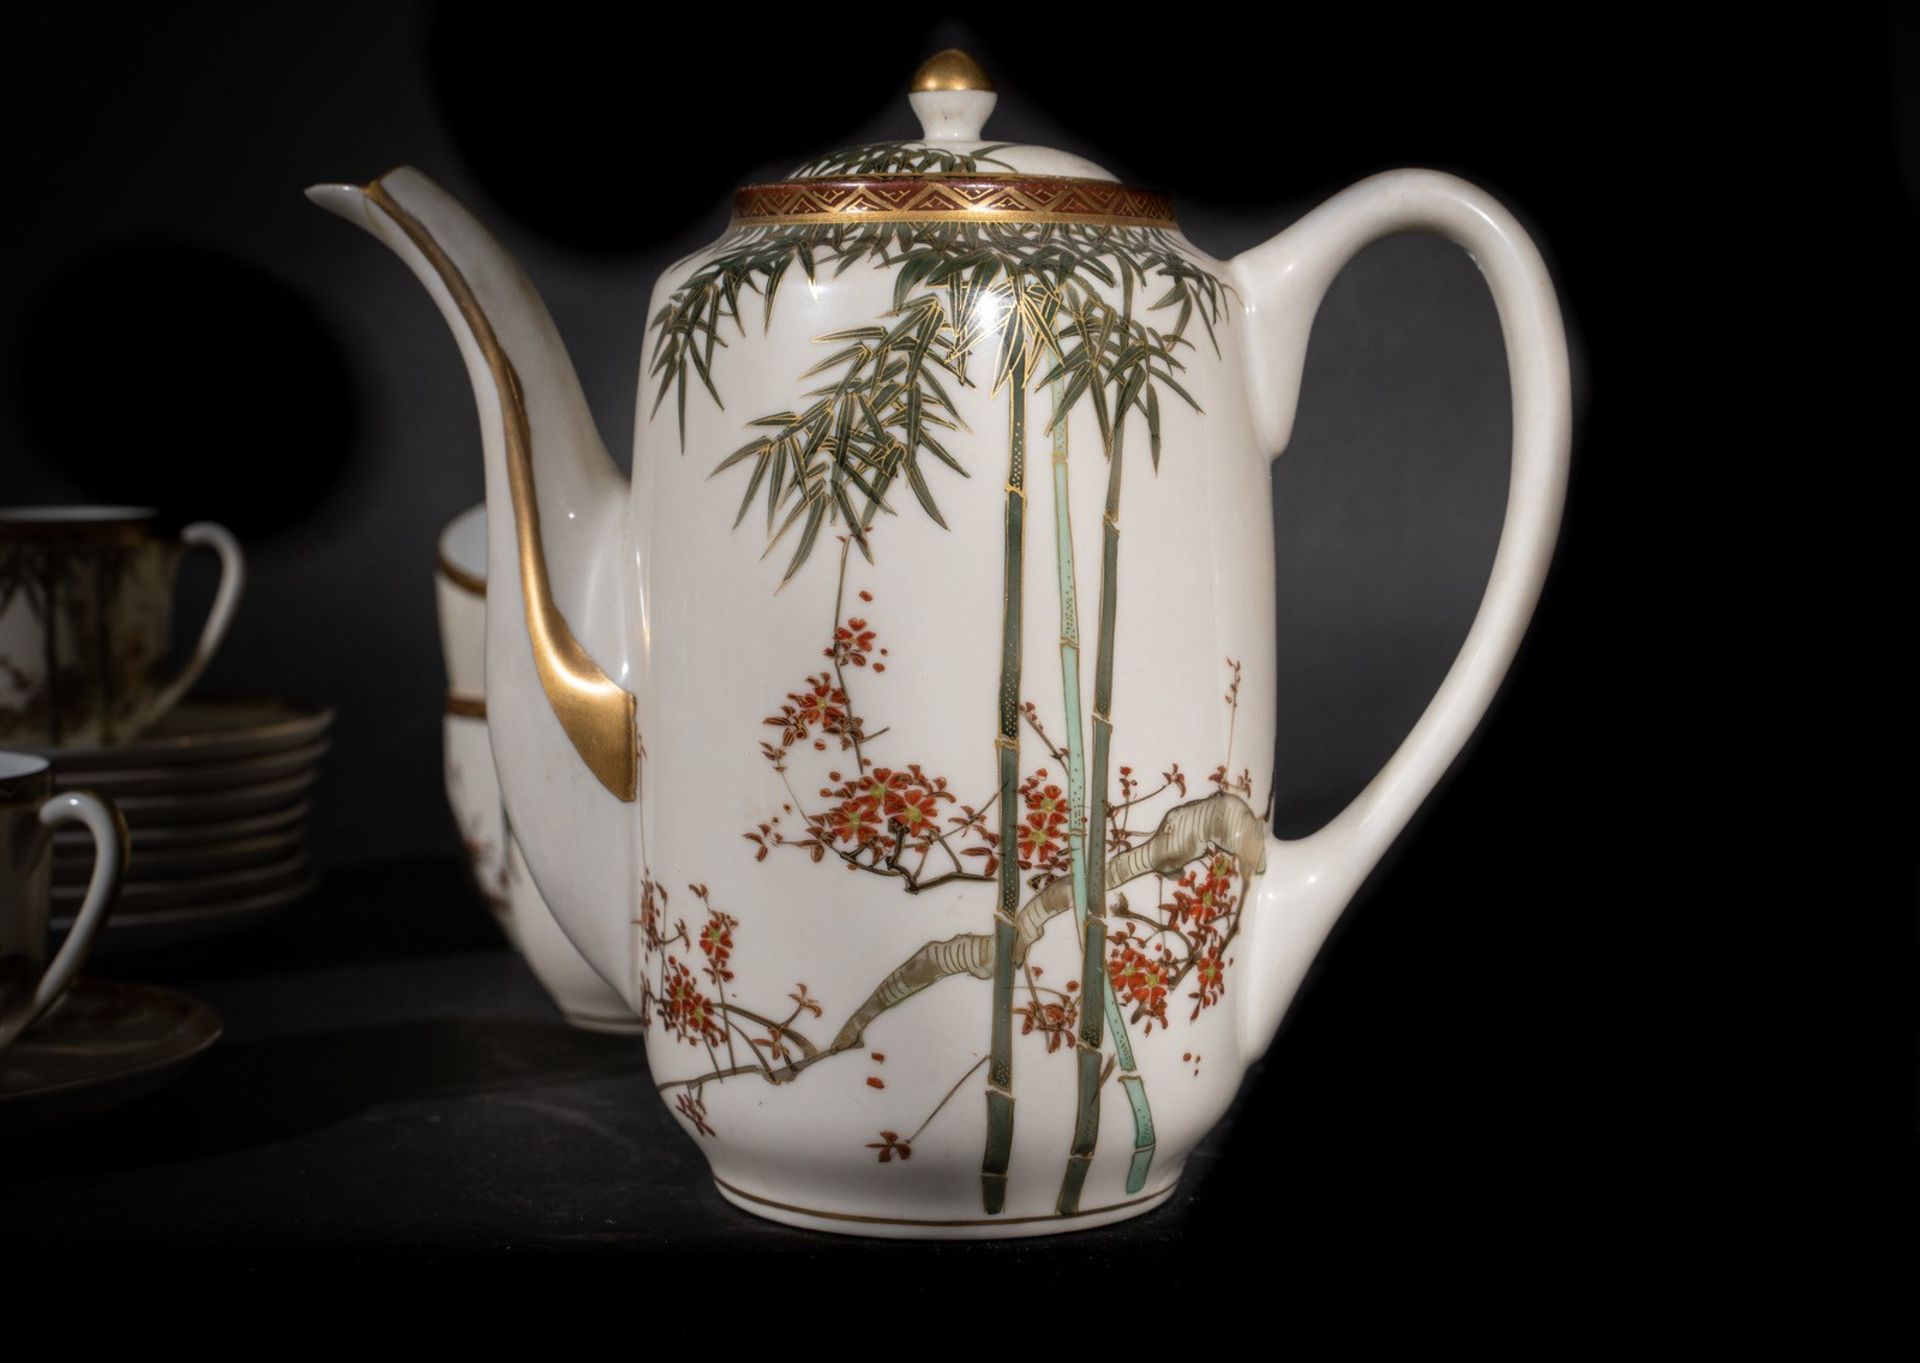 ARTE GIAPPONESE An eight cover white porcelain coffee serviceJapan, 19th century . - Image 3 of 6